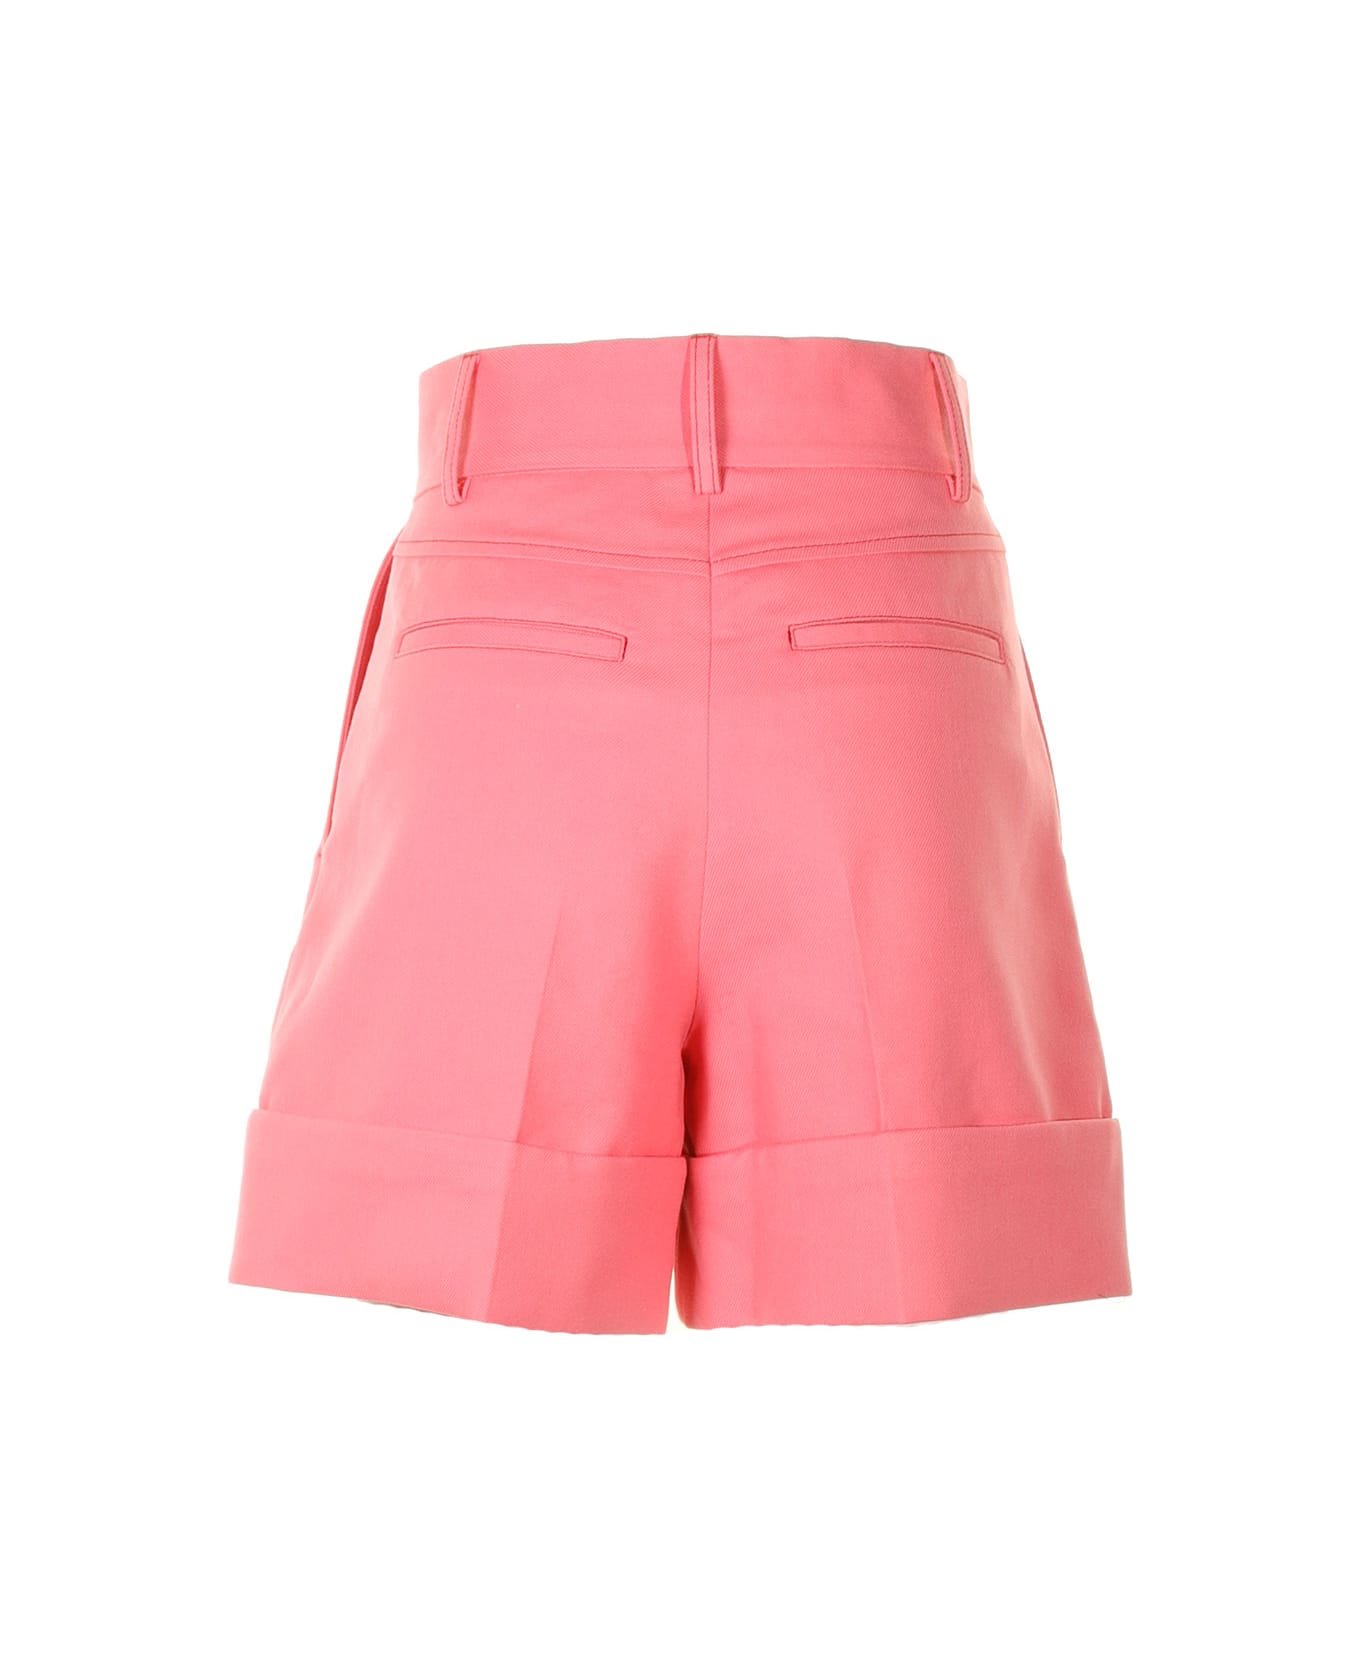 See by Chloé Pink High-waisted Shorts - SUNSET PINK ショートパンツ